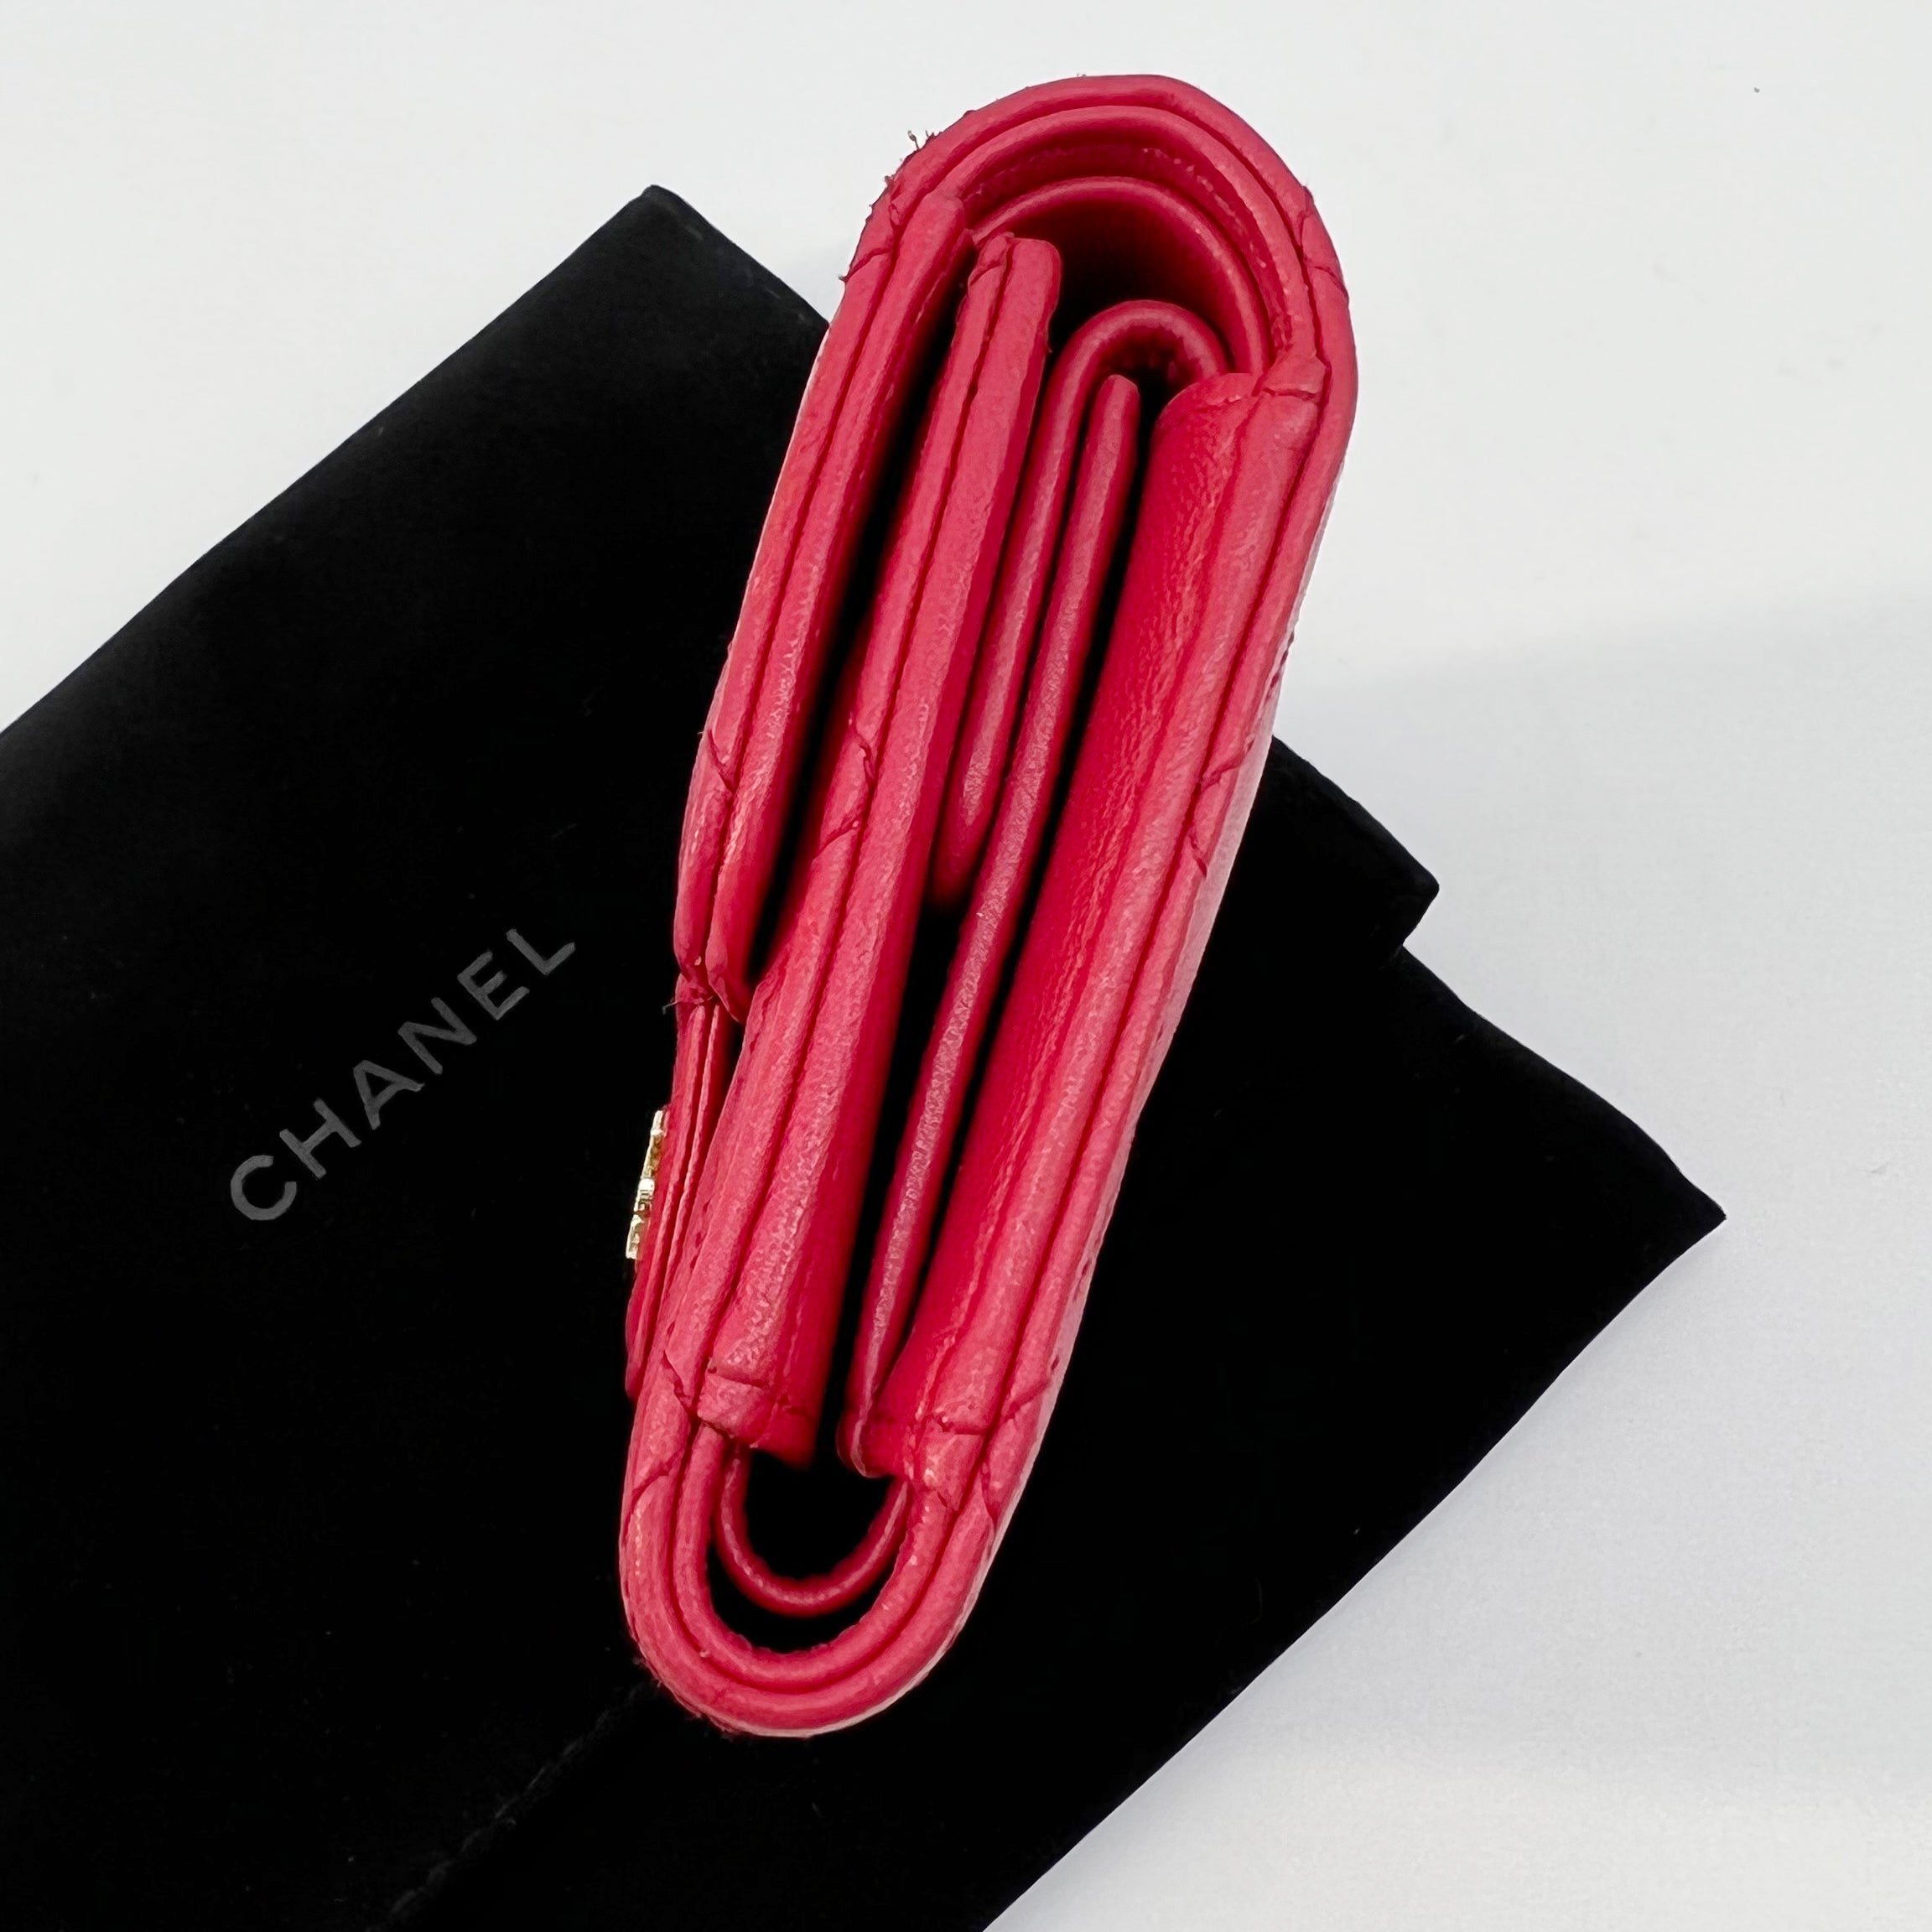 authentic chanel wallet